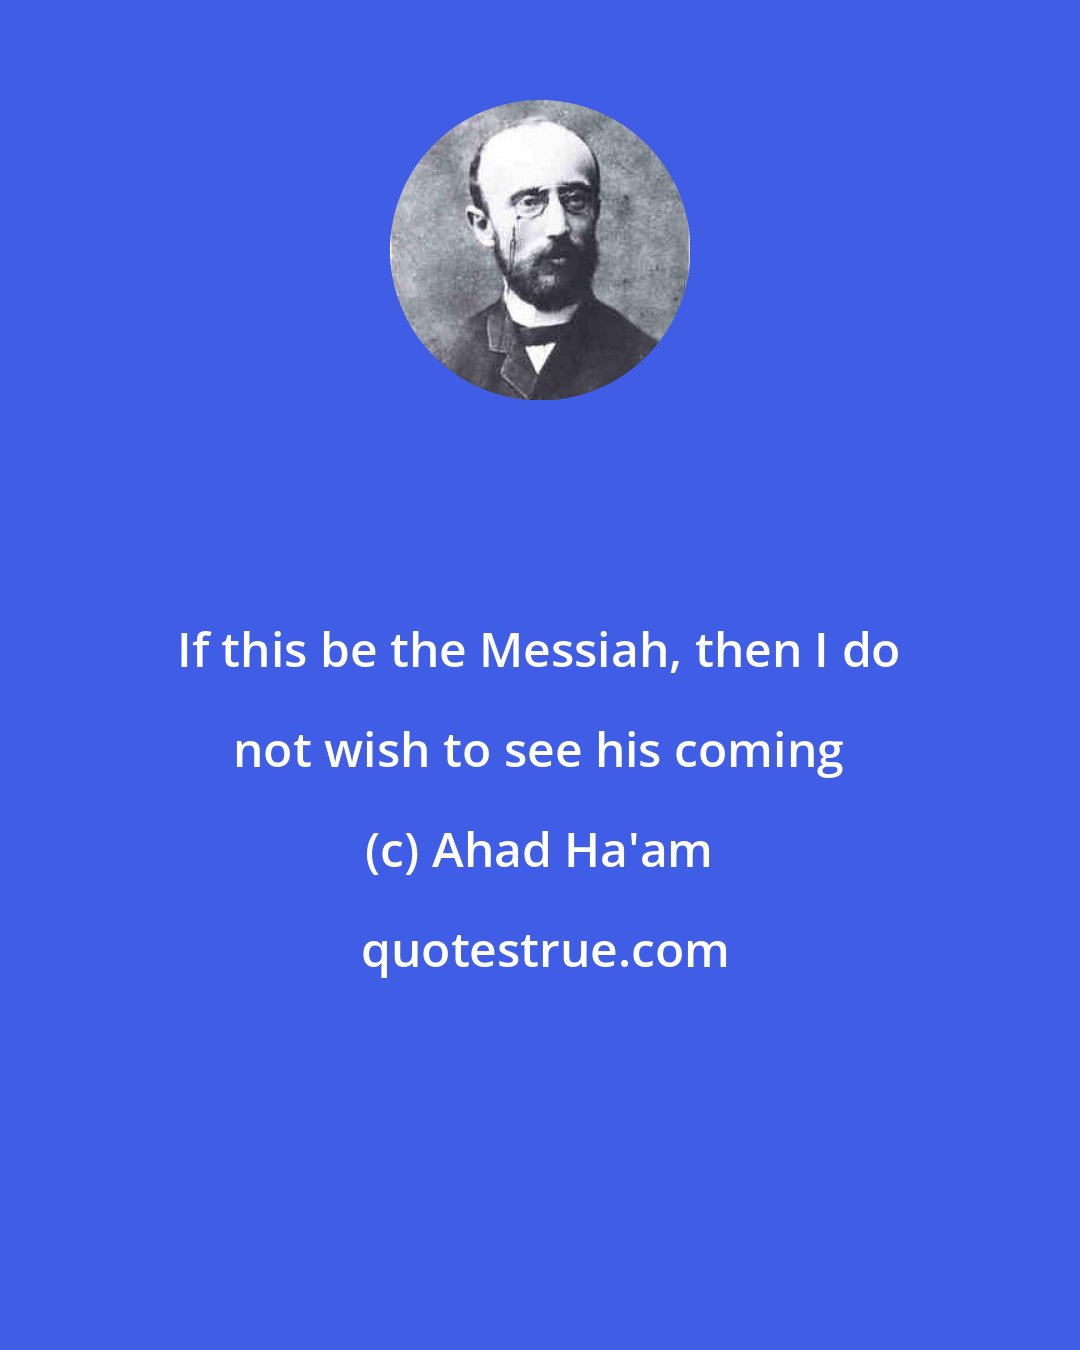 Ahad Ha'am: If this be the Messiah, then I do not wish to see his coming